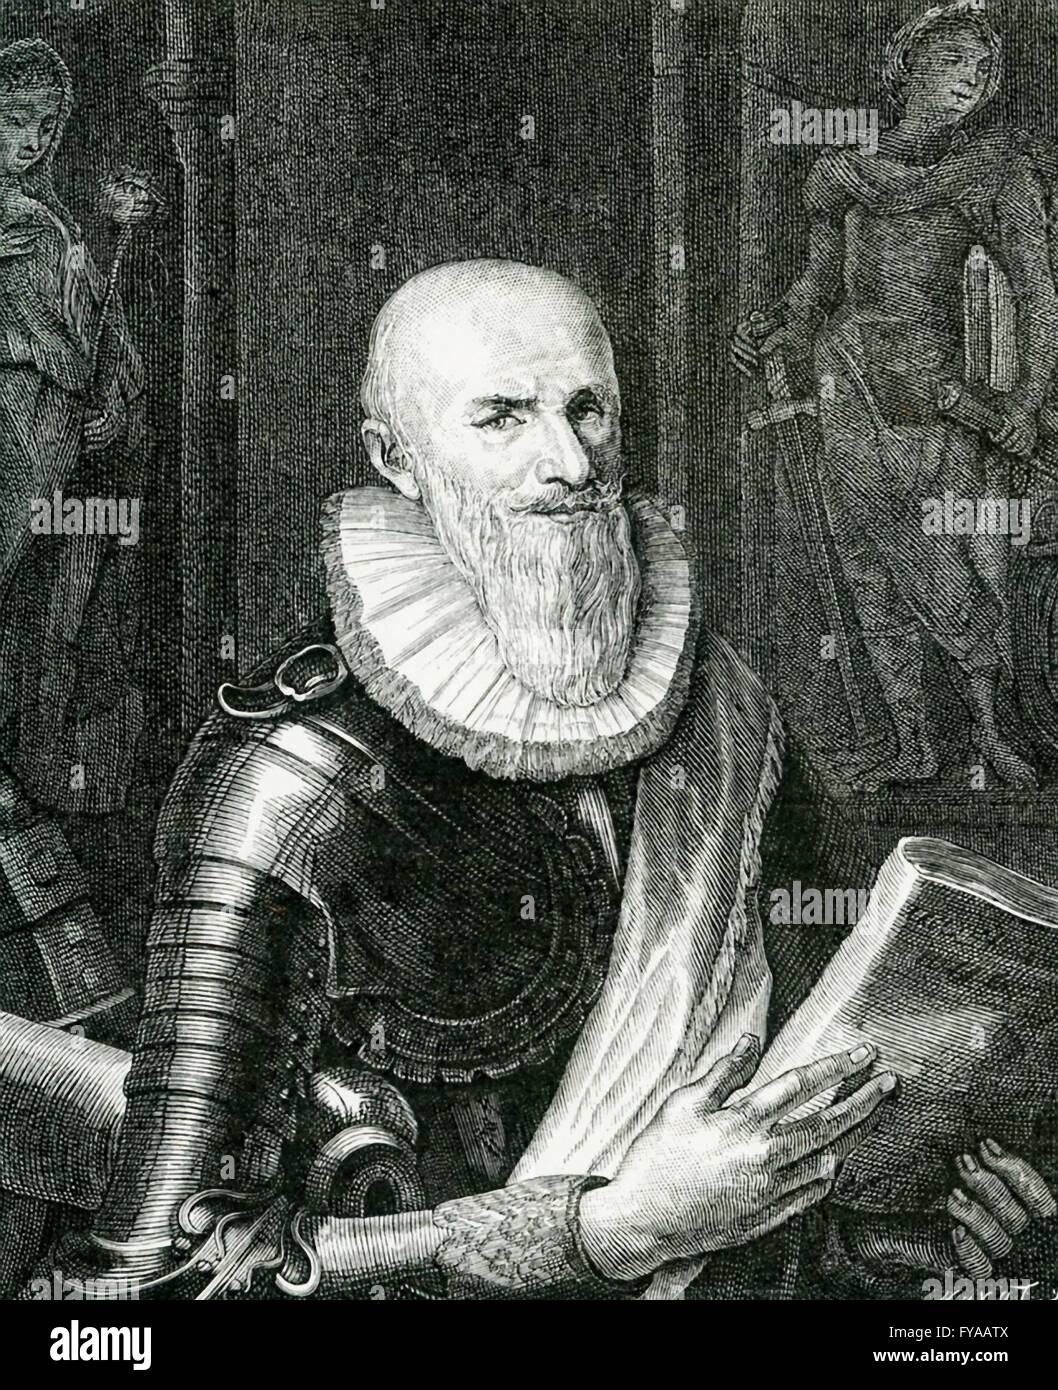 Maximilien de Bethune, duke of Sully,  (1560-1641) was a French noble, soldier, and statesman. He was also a key official and adviser to the French king Henry IV and helped him build a strong centralized government. He served as superintendent of finances and grand master of the artillery of France. The text that accompanied this print, reads: The head, after the portrait of the Flemish painter Pourbus that belonged to the Duke de Sully. It was designed by Gabriel de Saint-Aubin and engraved by Chenu. Stock Photo